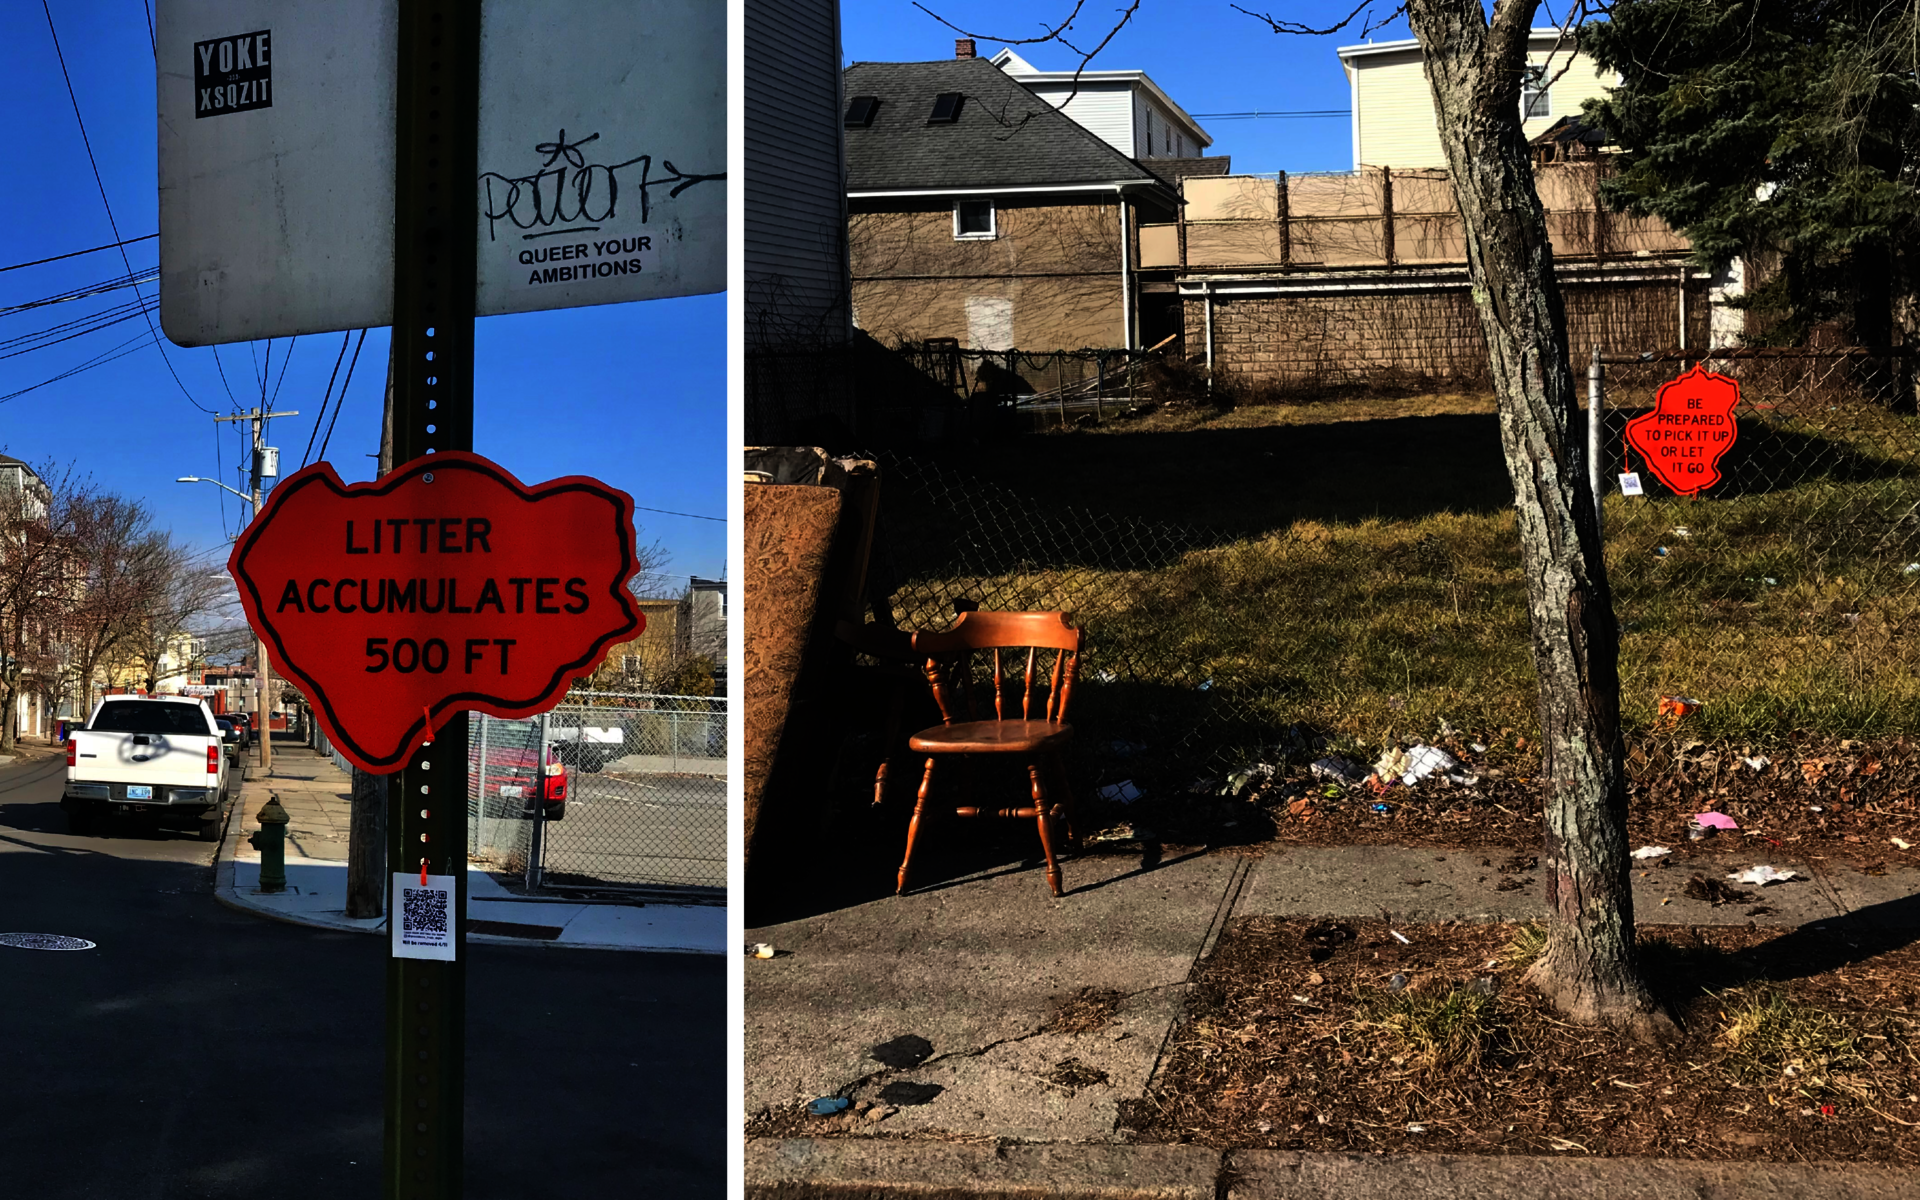 An image collage of two organically-shaped orange signs on a neighborhood street; one reads “Litter accumulates 500 FT,” and the other says, “Be prepared to pick it up or let it go.”